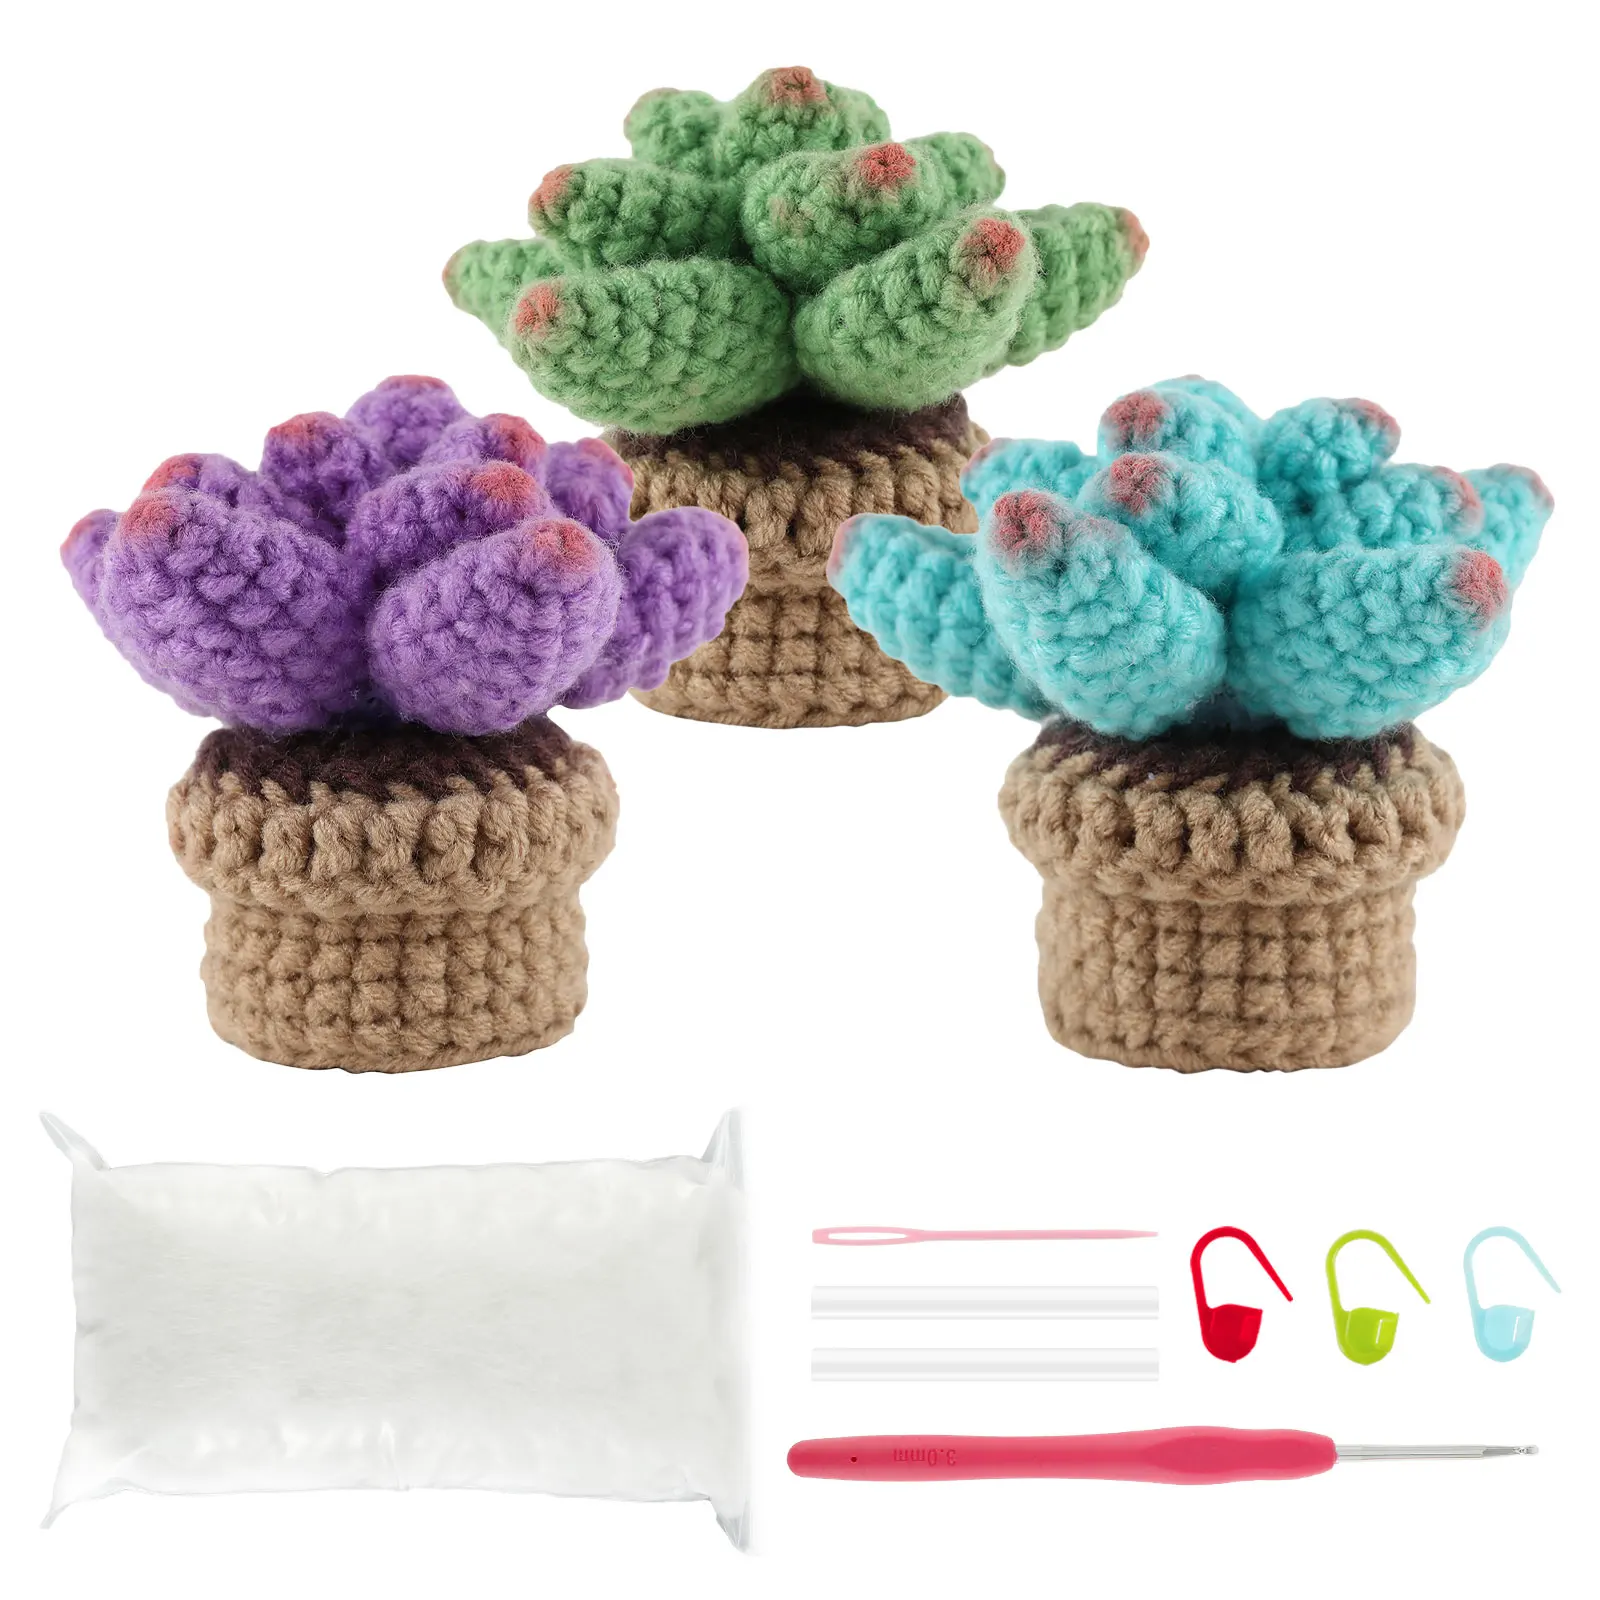 

3Pcs Crochet Potted Kit for Beginners Cute Crochet Succulent Kit DIY Potted Plants Craft for Adults Children Complete Crochet